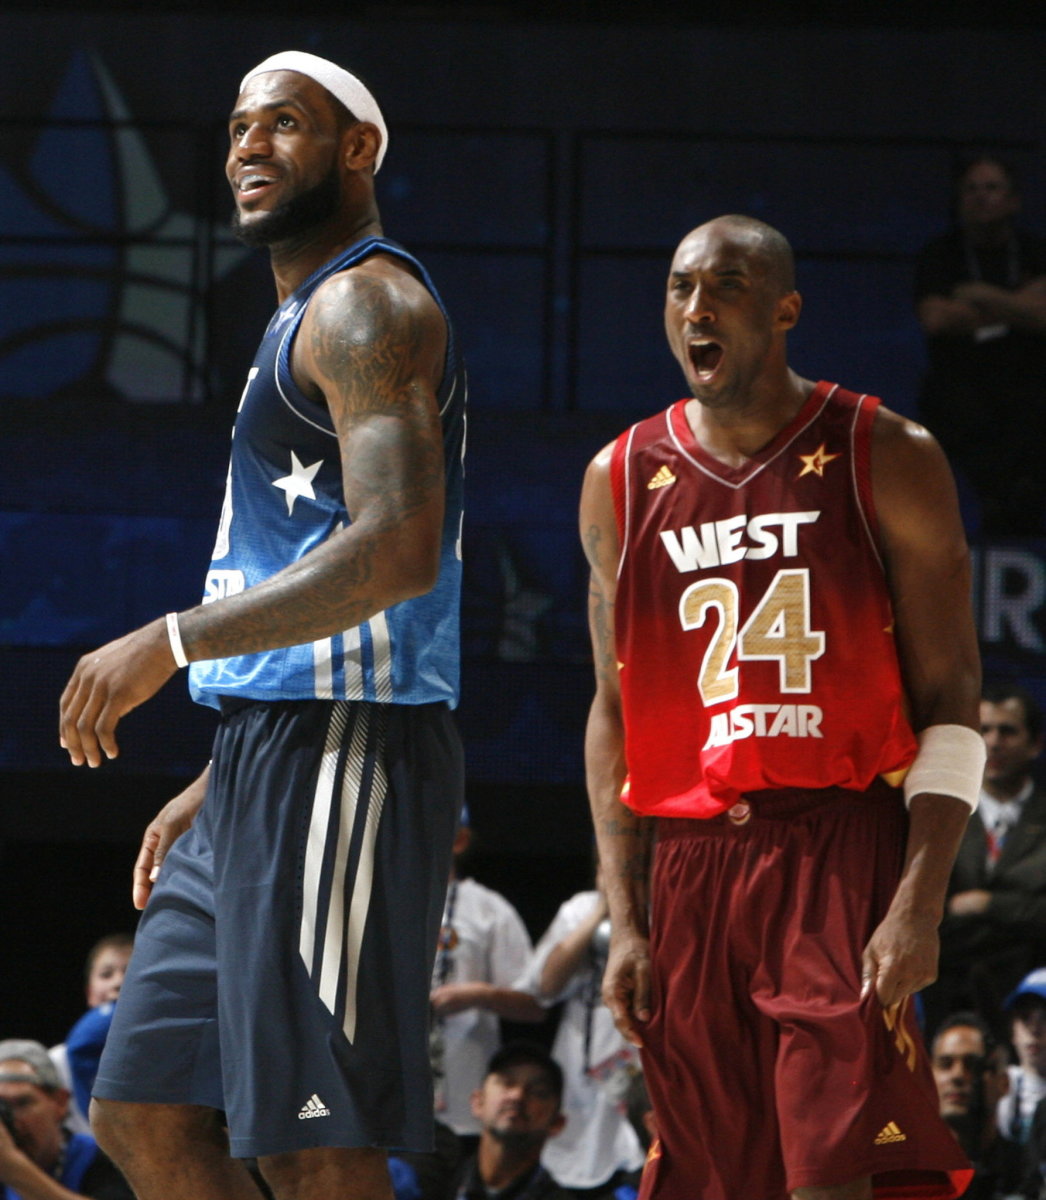 Two all-time greats, LeBron James and Kobe Bryant